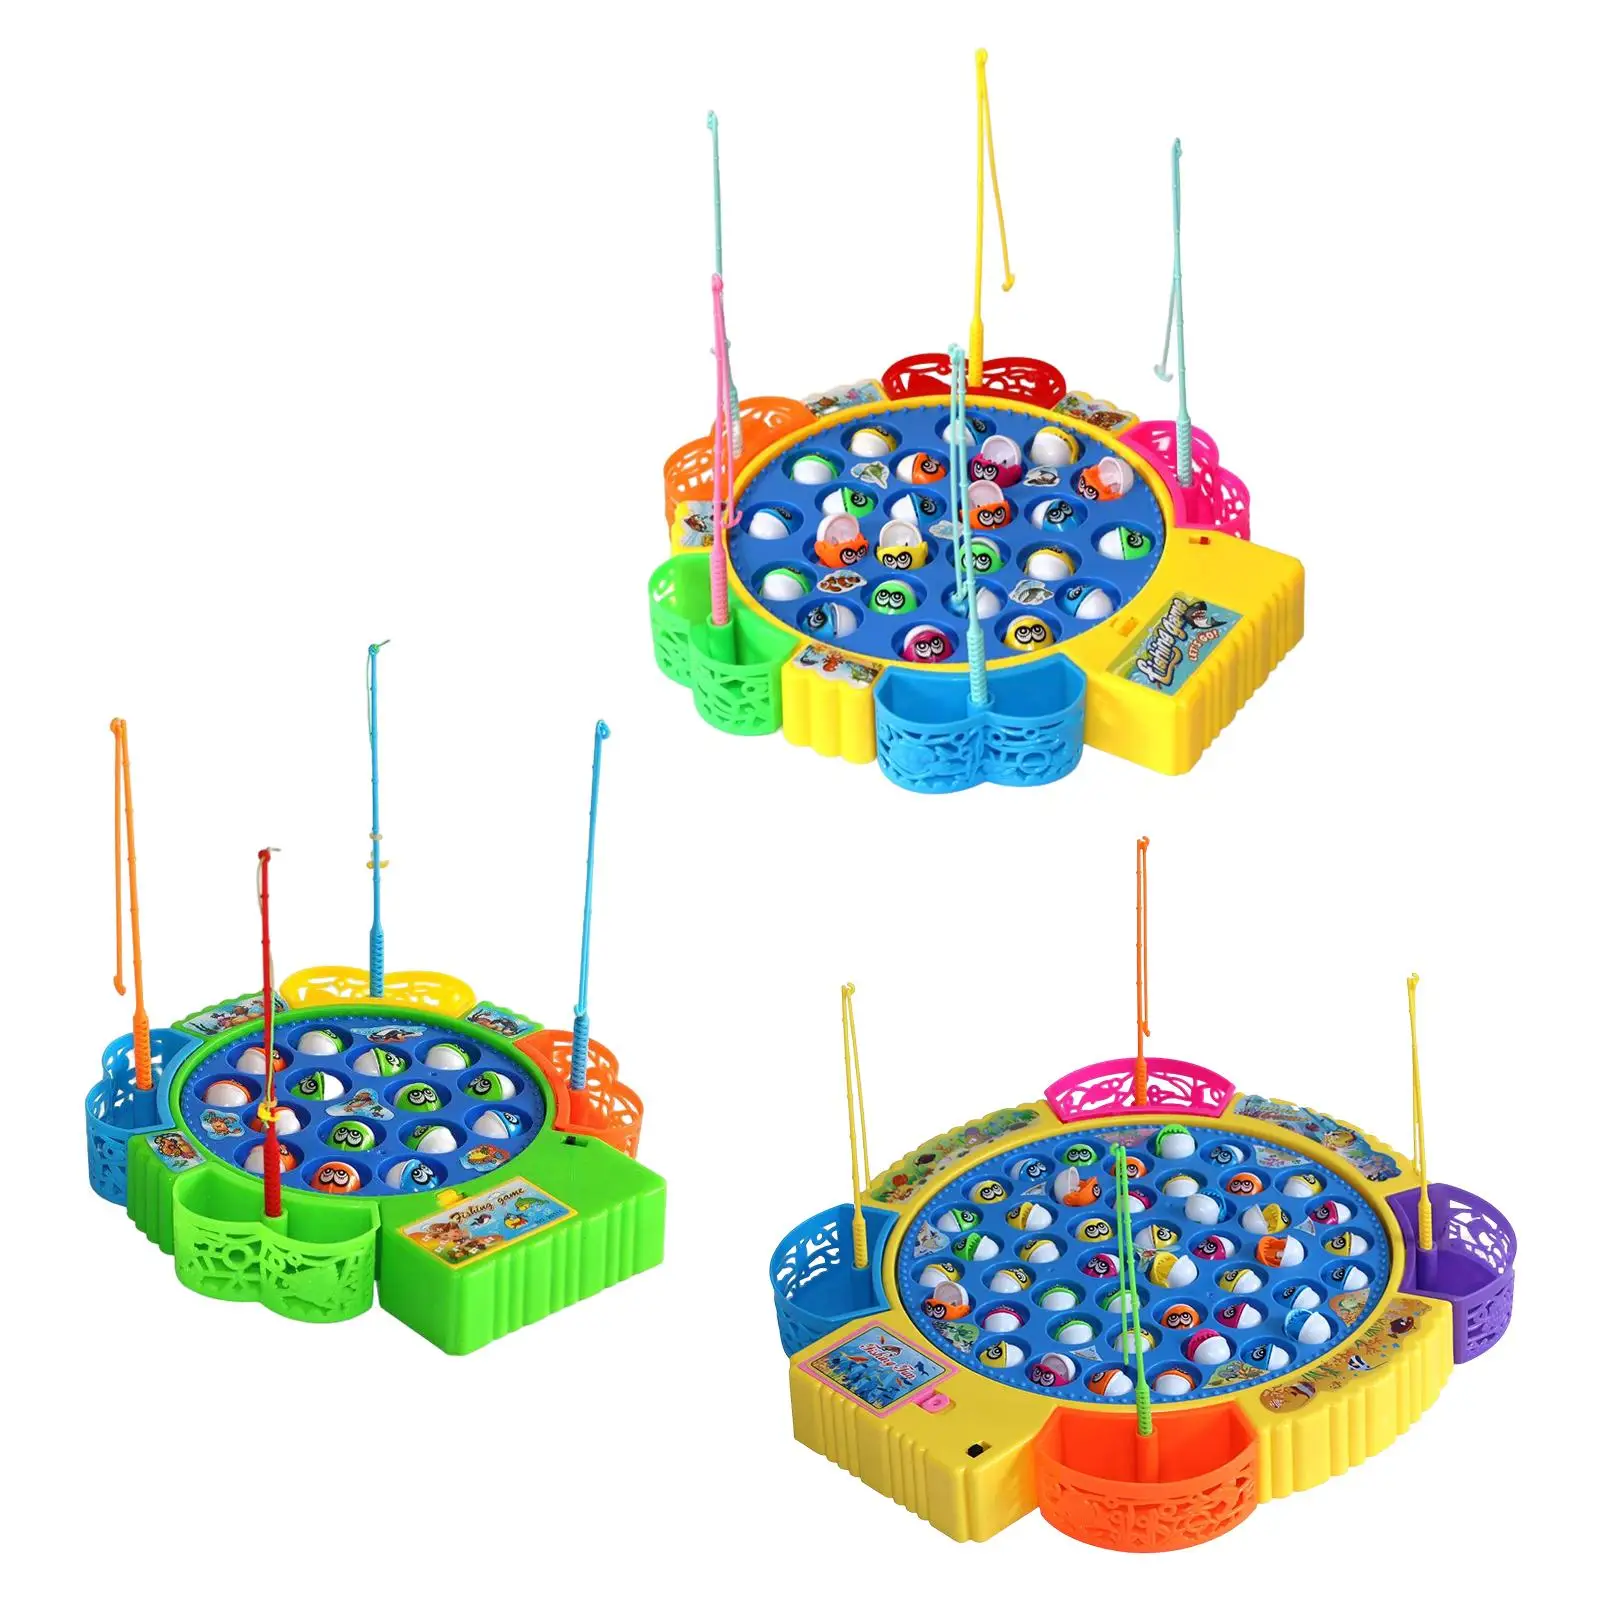 Montessori Rotating Fishing Game Kids Toy Ability Training Fine Motor skill, board Game for Ages 3+ Educational Toy Preschool